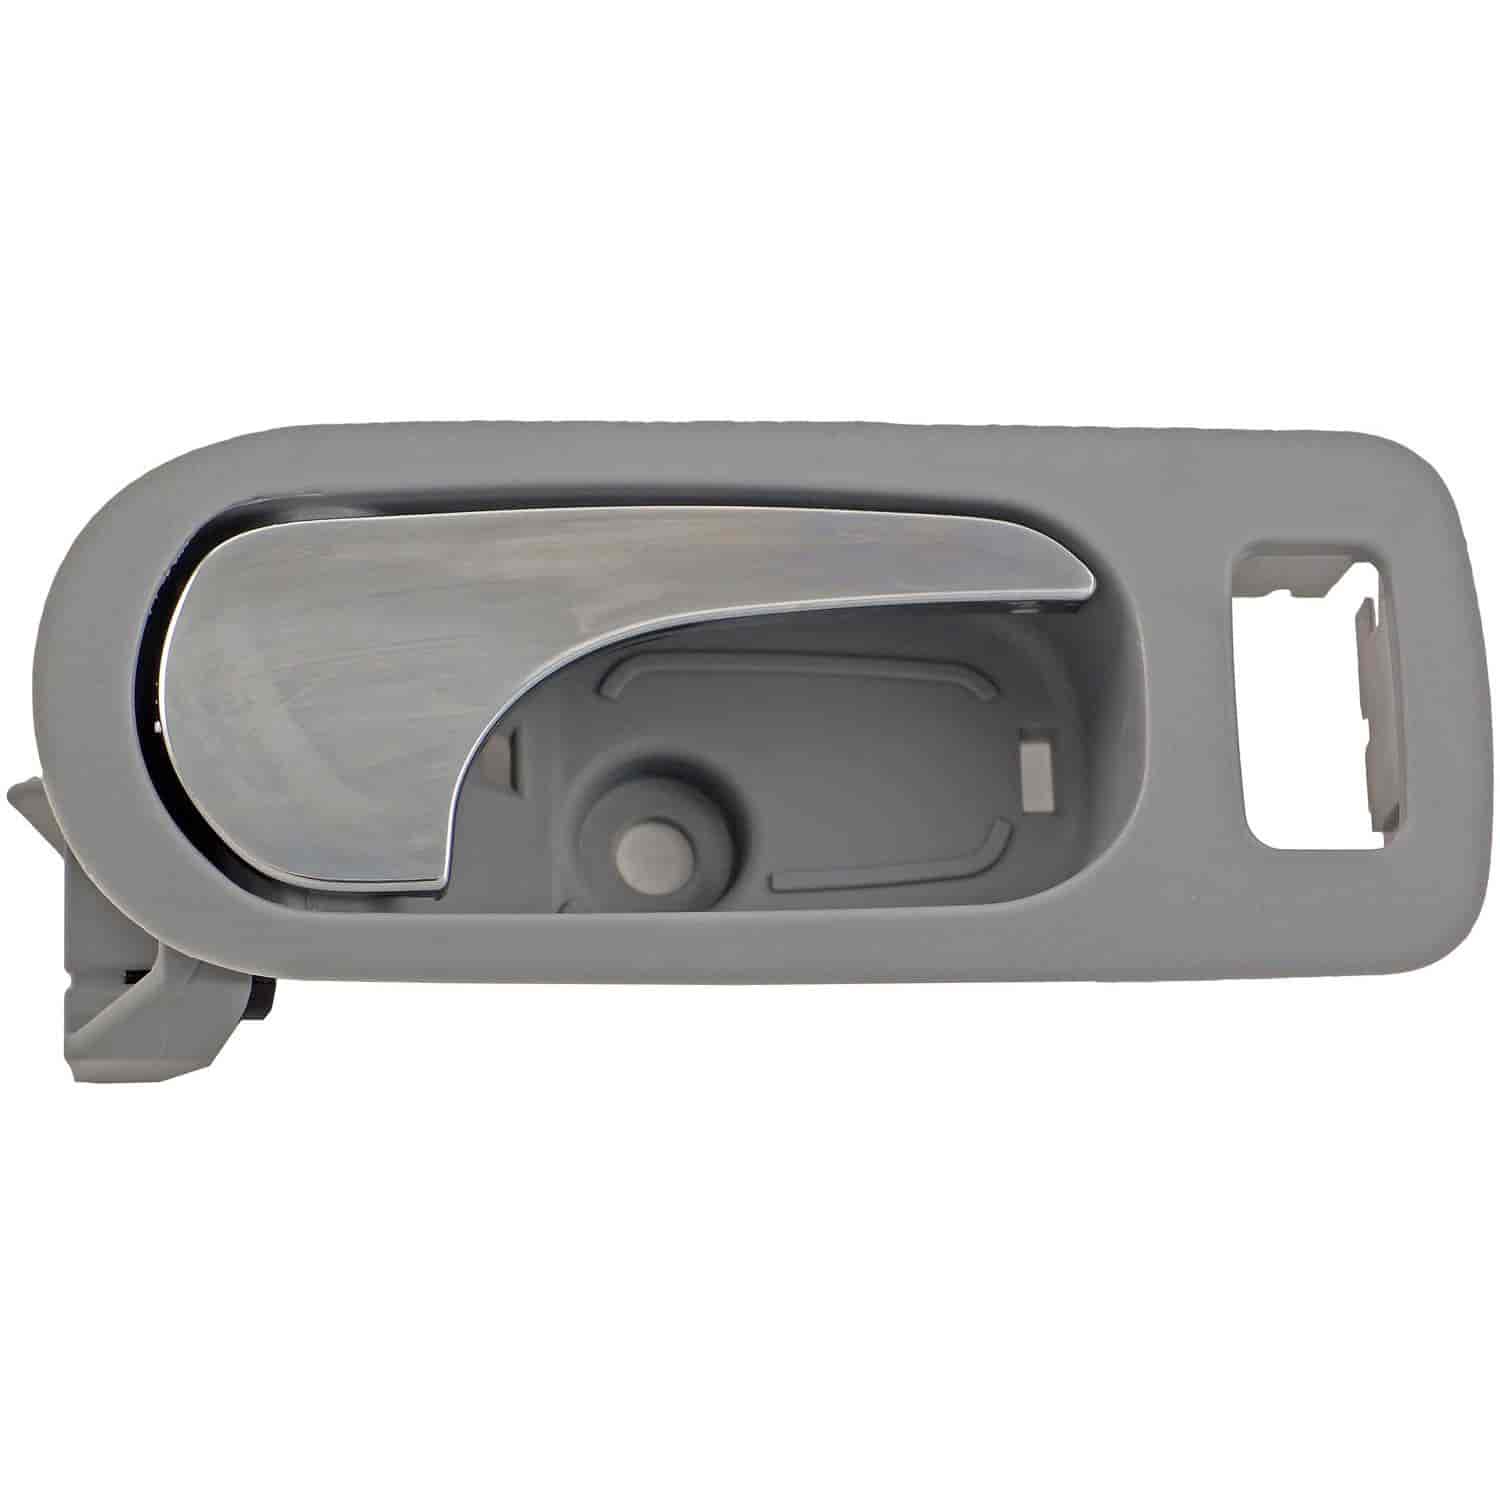 Interior Door Handle - Front Right - Chrome Lever+Gray Housing